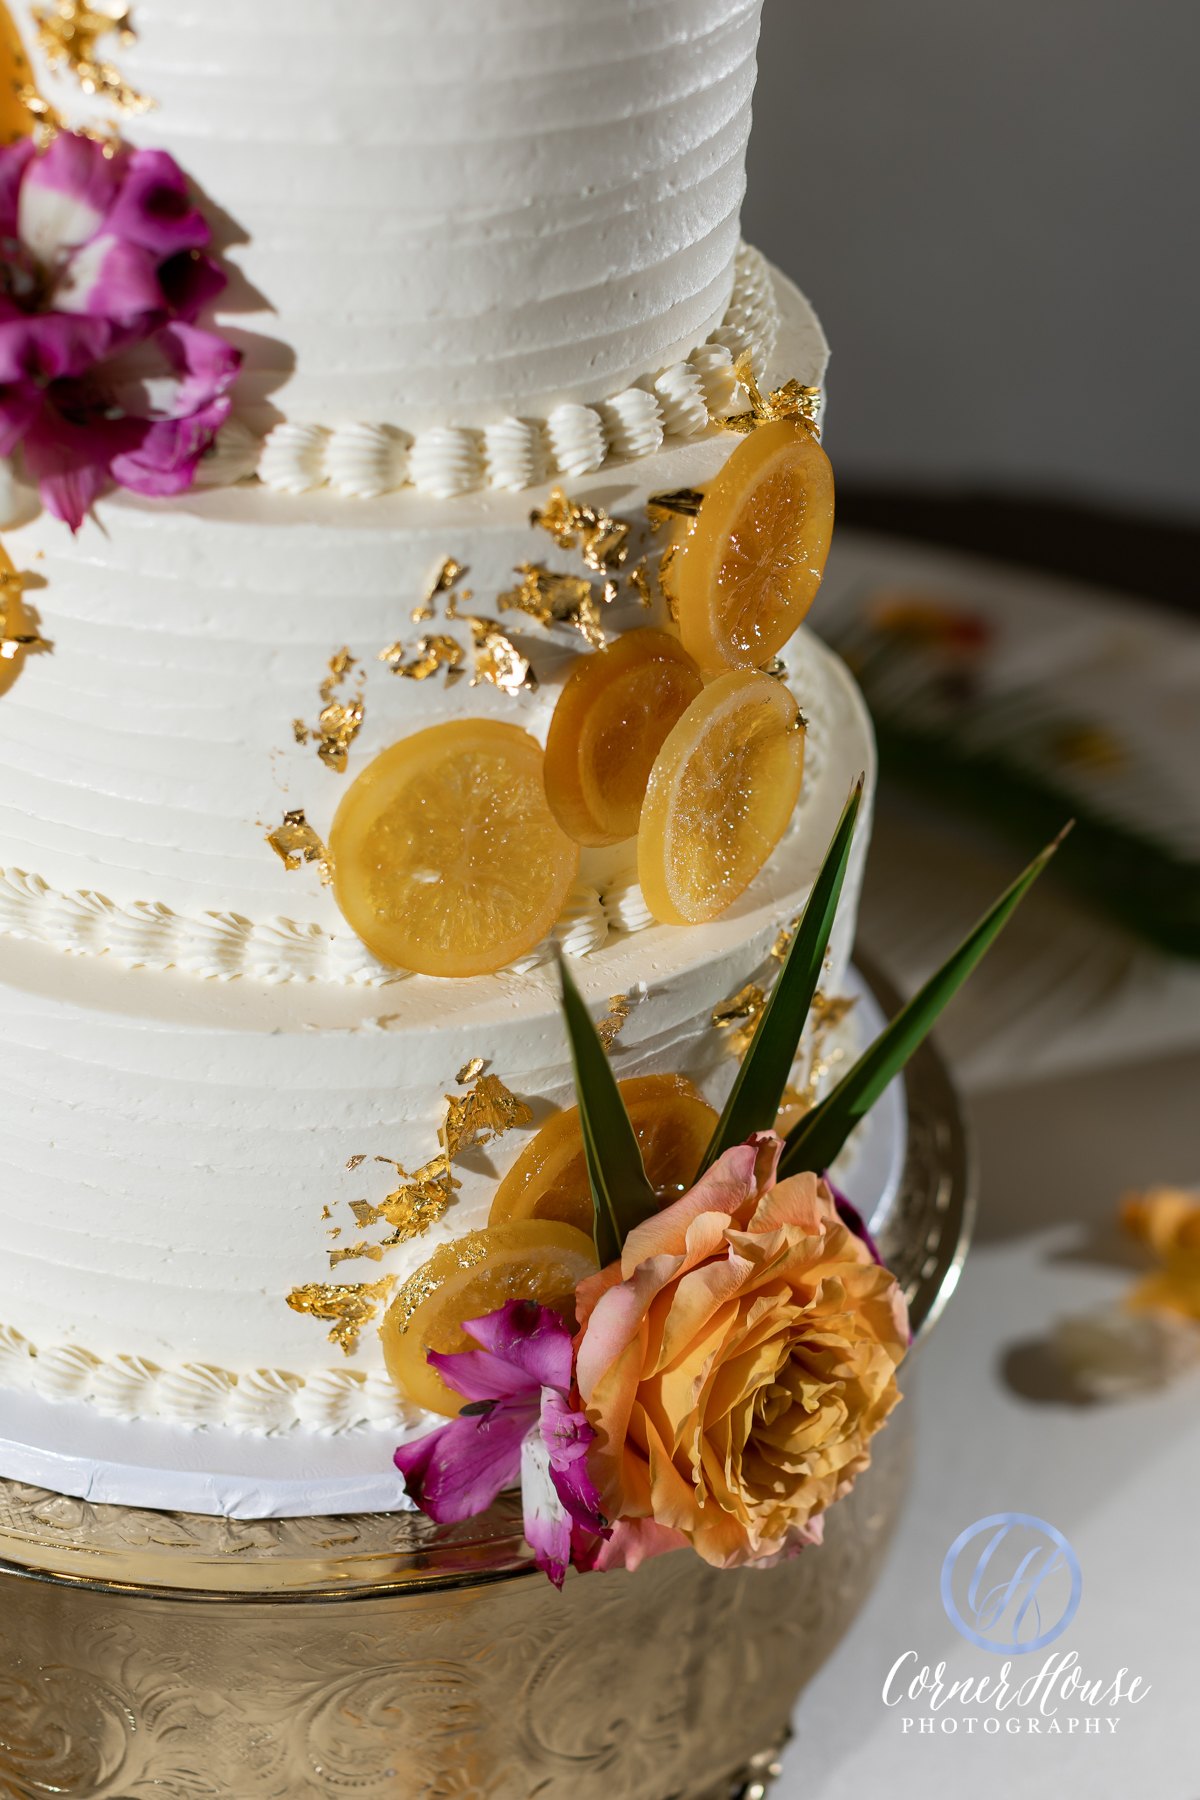 wedding cake decorated with citrus slices